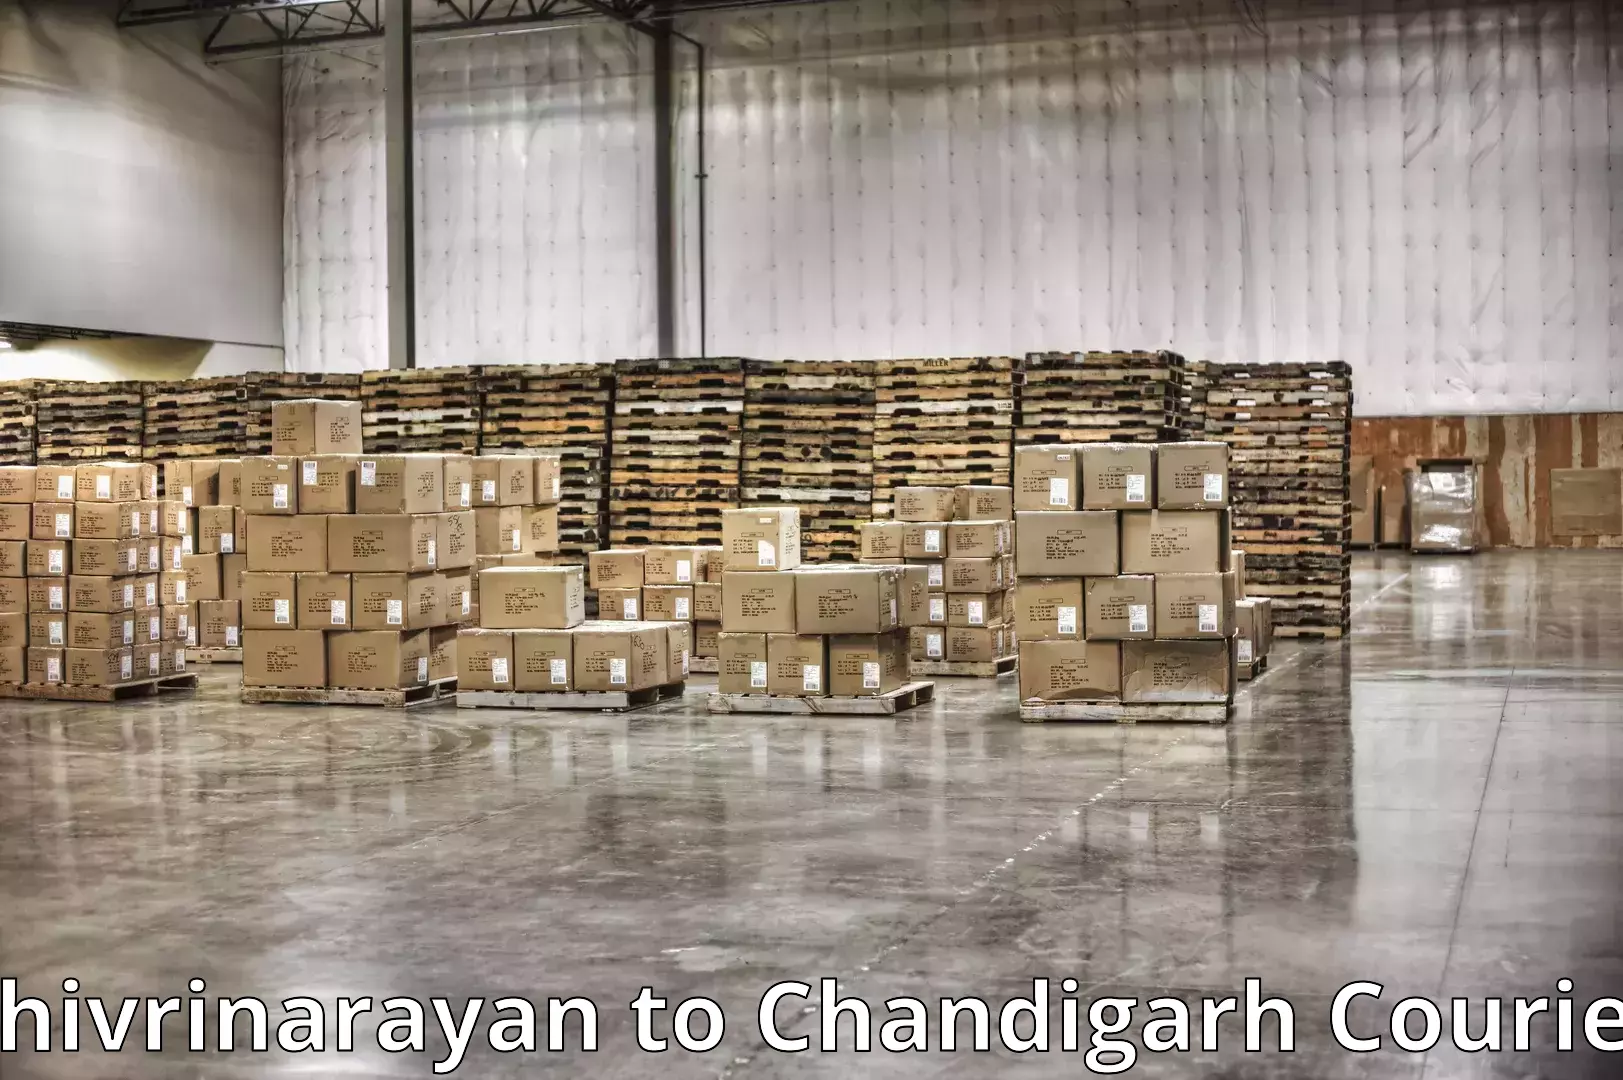 High-quality moving services Shivrinarayan to Chandigarh